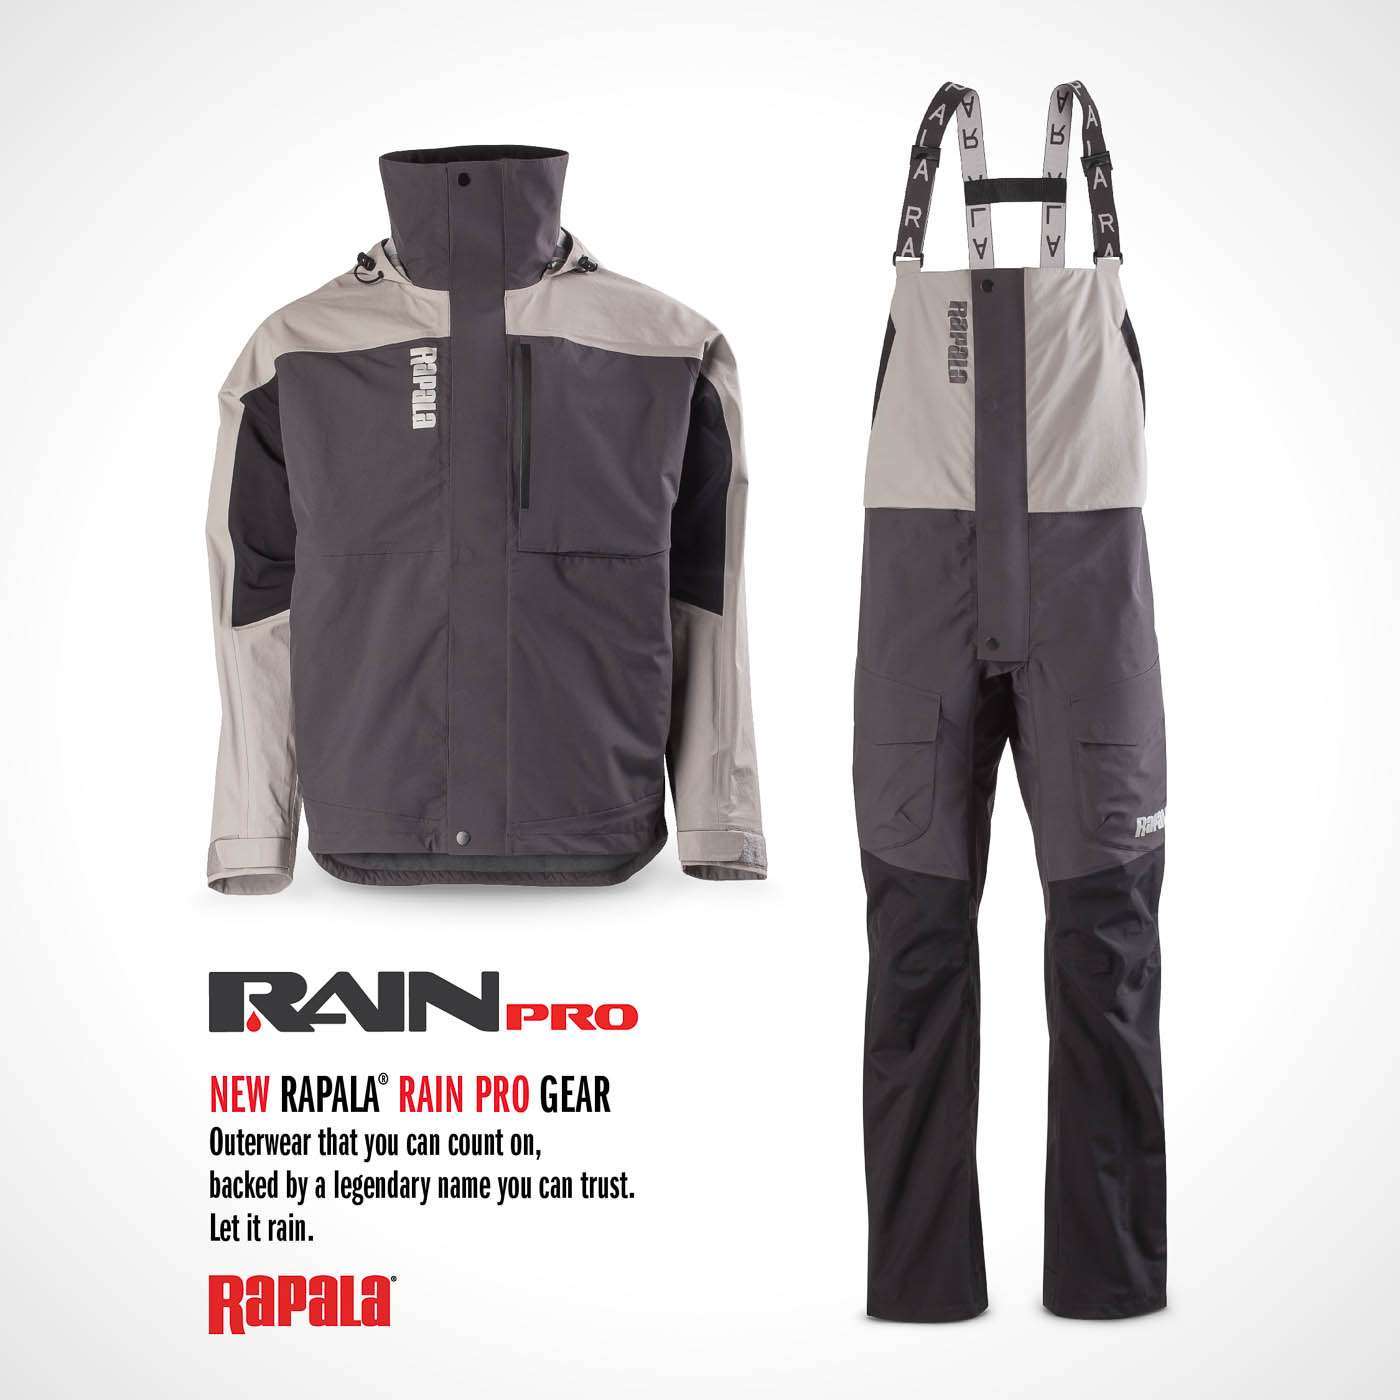 <p><strong>Rapala Rain Pro Series</strong></p><p>The Rapala Rain Pro Series features three-layer construction, a 100 percent nylon ripstop Taslan/Nylon Honey Taslan, ripstop shell to prevent tears. The waterproof, breathable shell features taped, sealed seams, YKK zippers, and a reflective logo. The jacket features adjustable drawstrings, two-way hood, outer chest zip pocket with microfiber cloth, hand warming pockets, interior pouch pockets, and adjustable hook and loop cuffs. $199.99. <a href=